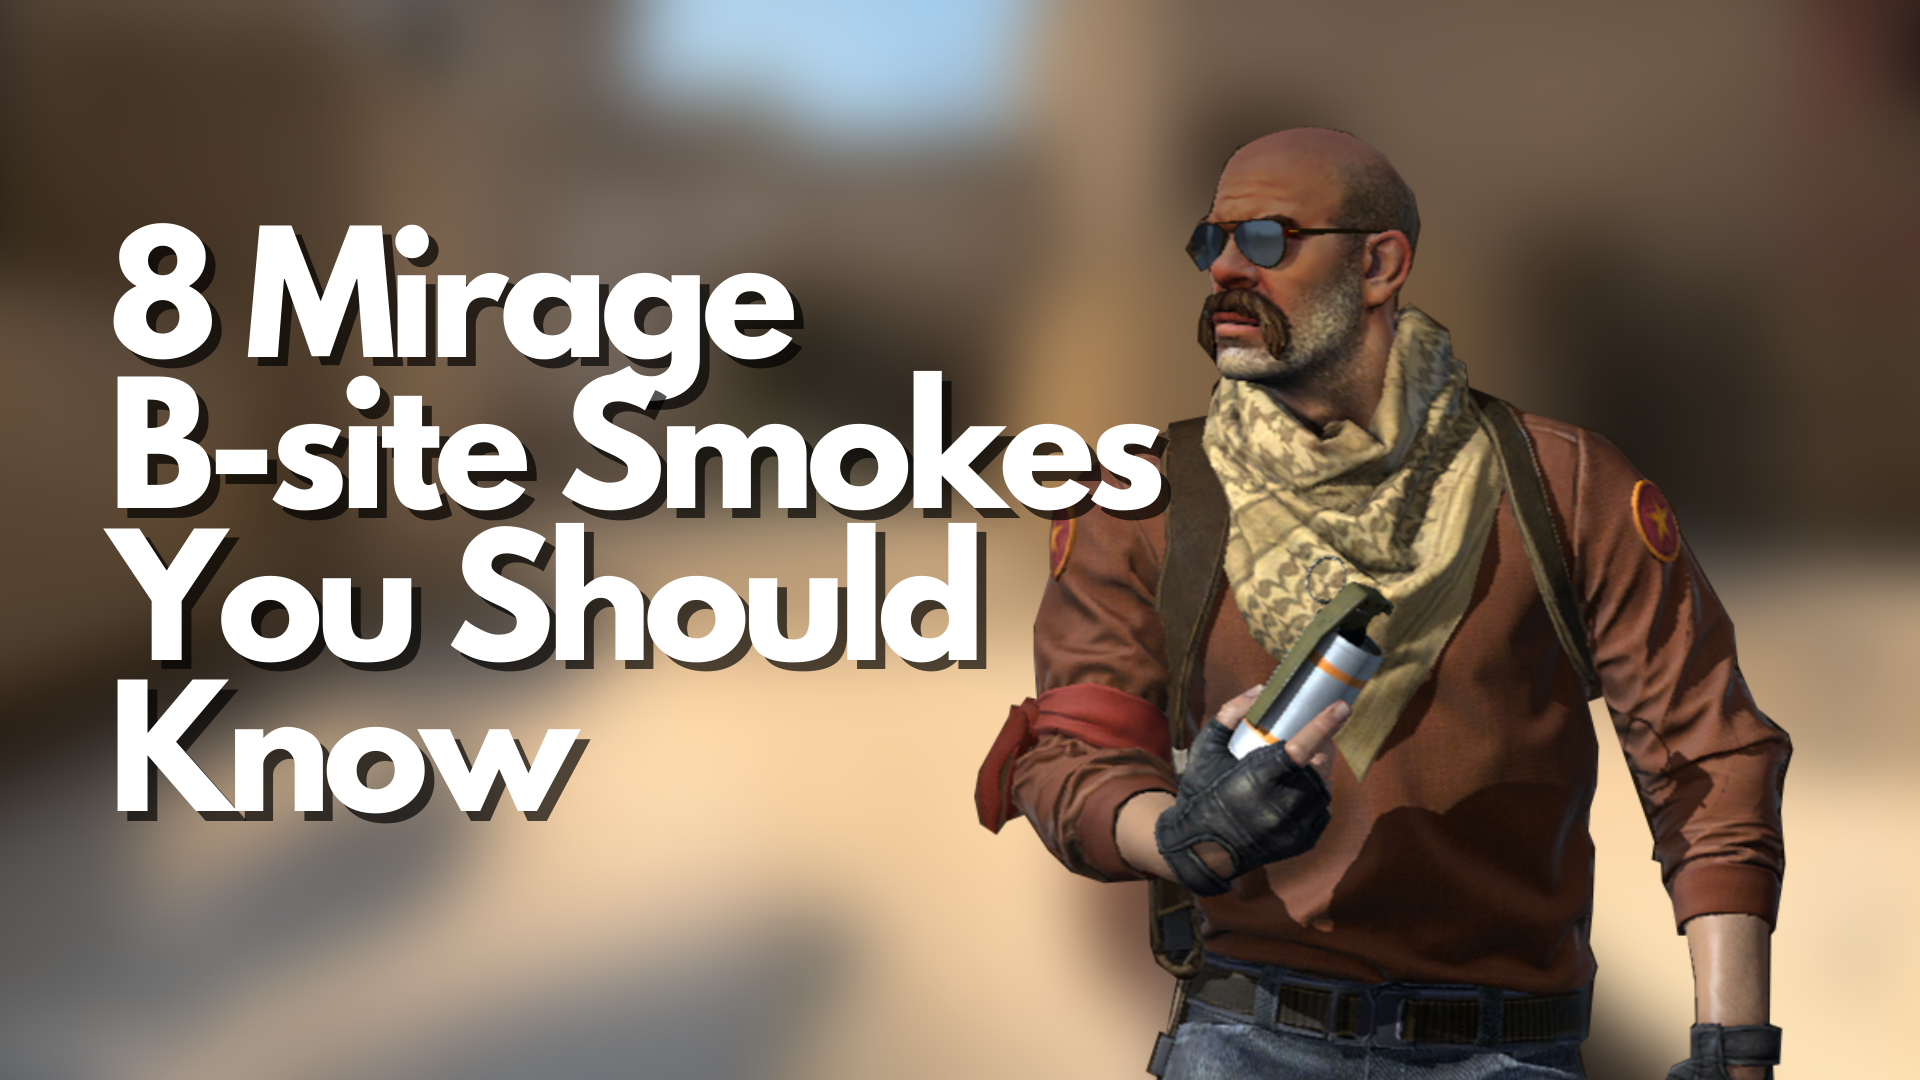 8 Mirage B-site Smokes You Should Know